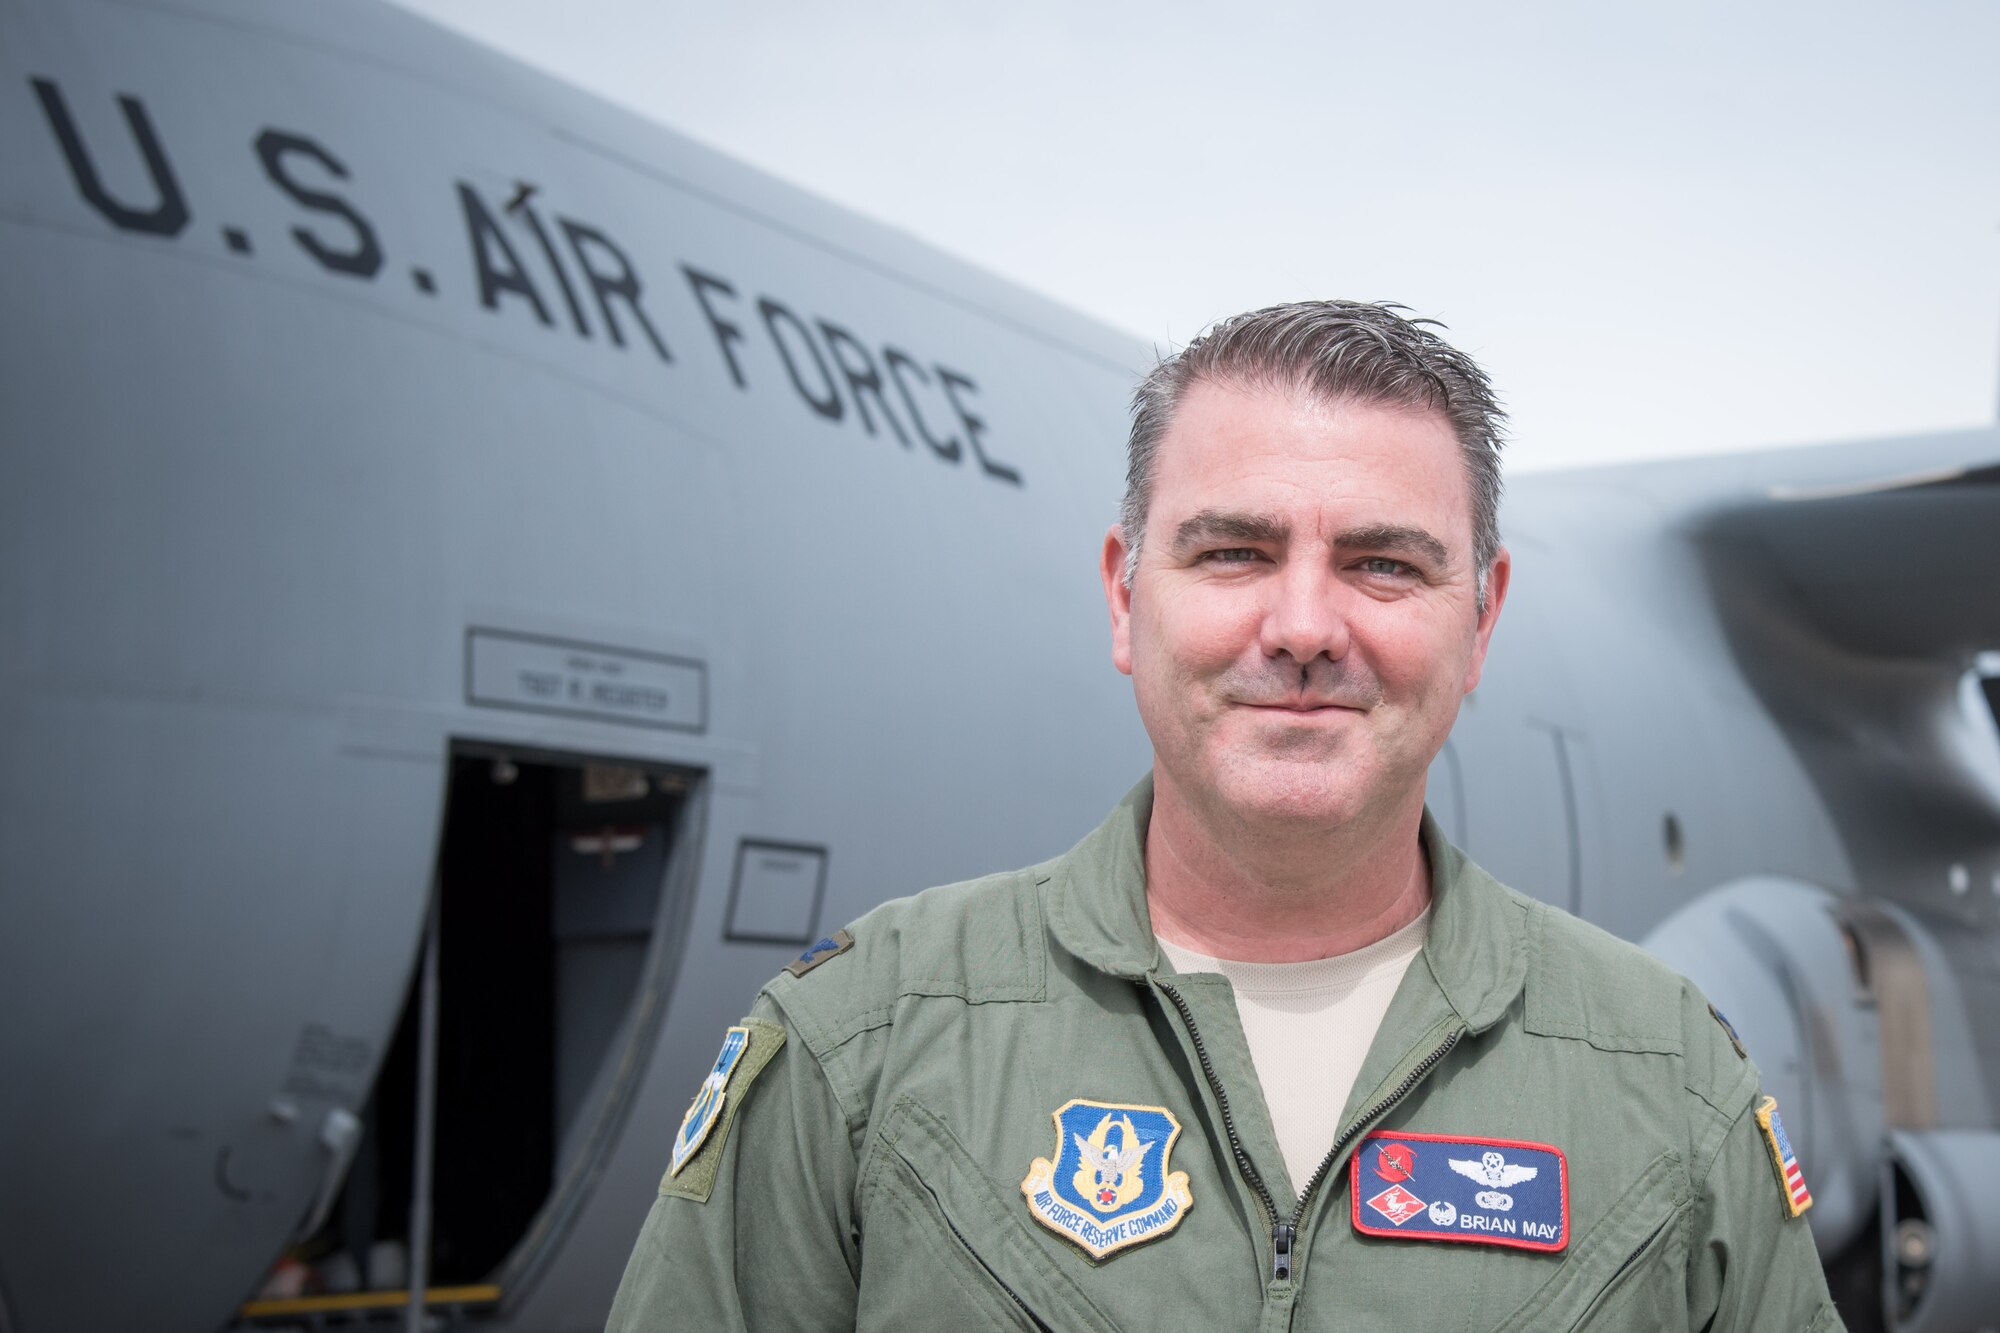 Col. Brian May, 403rd Operations Group commander, poses for a photo in front of a C-130J Super Hercules aircraft May 4, 2017 at Keesler Air Force Base, Mississippi. (U.S. Air Force photo/Staff Sgt. Heather Heiney) 